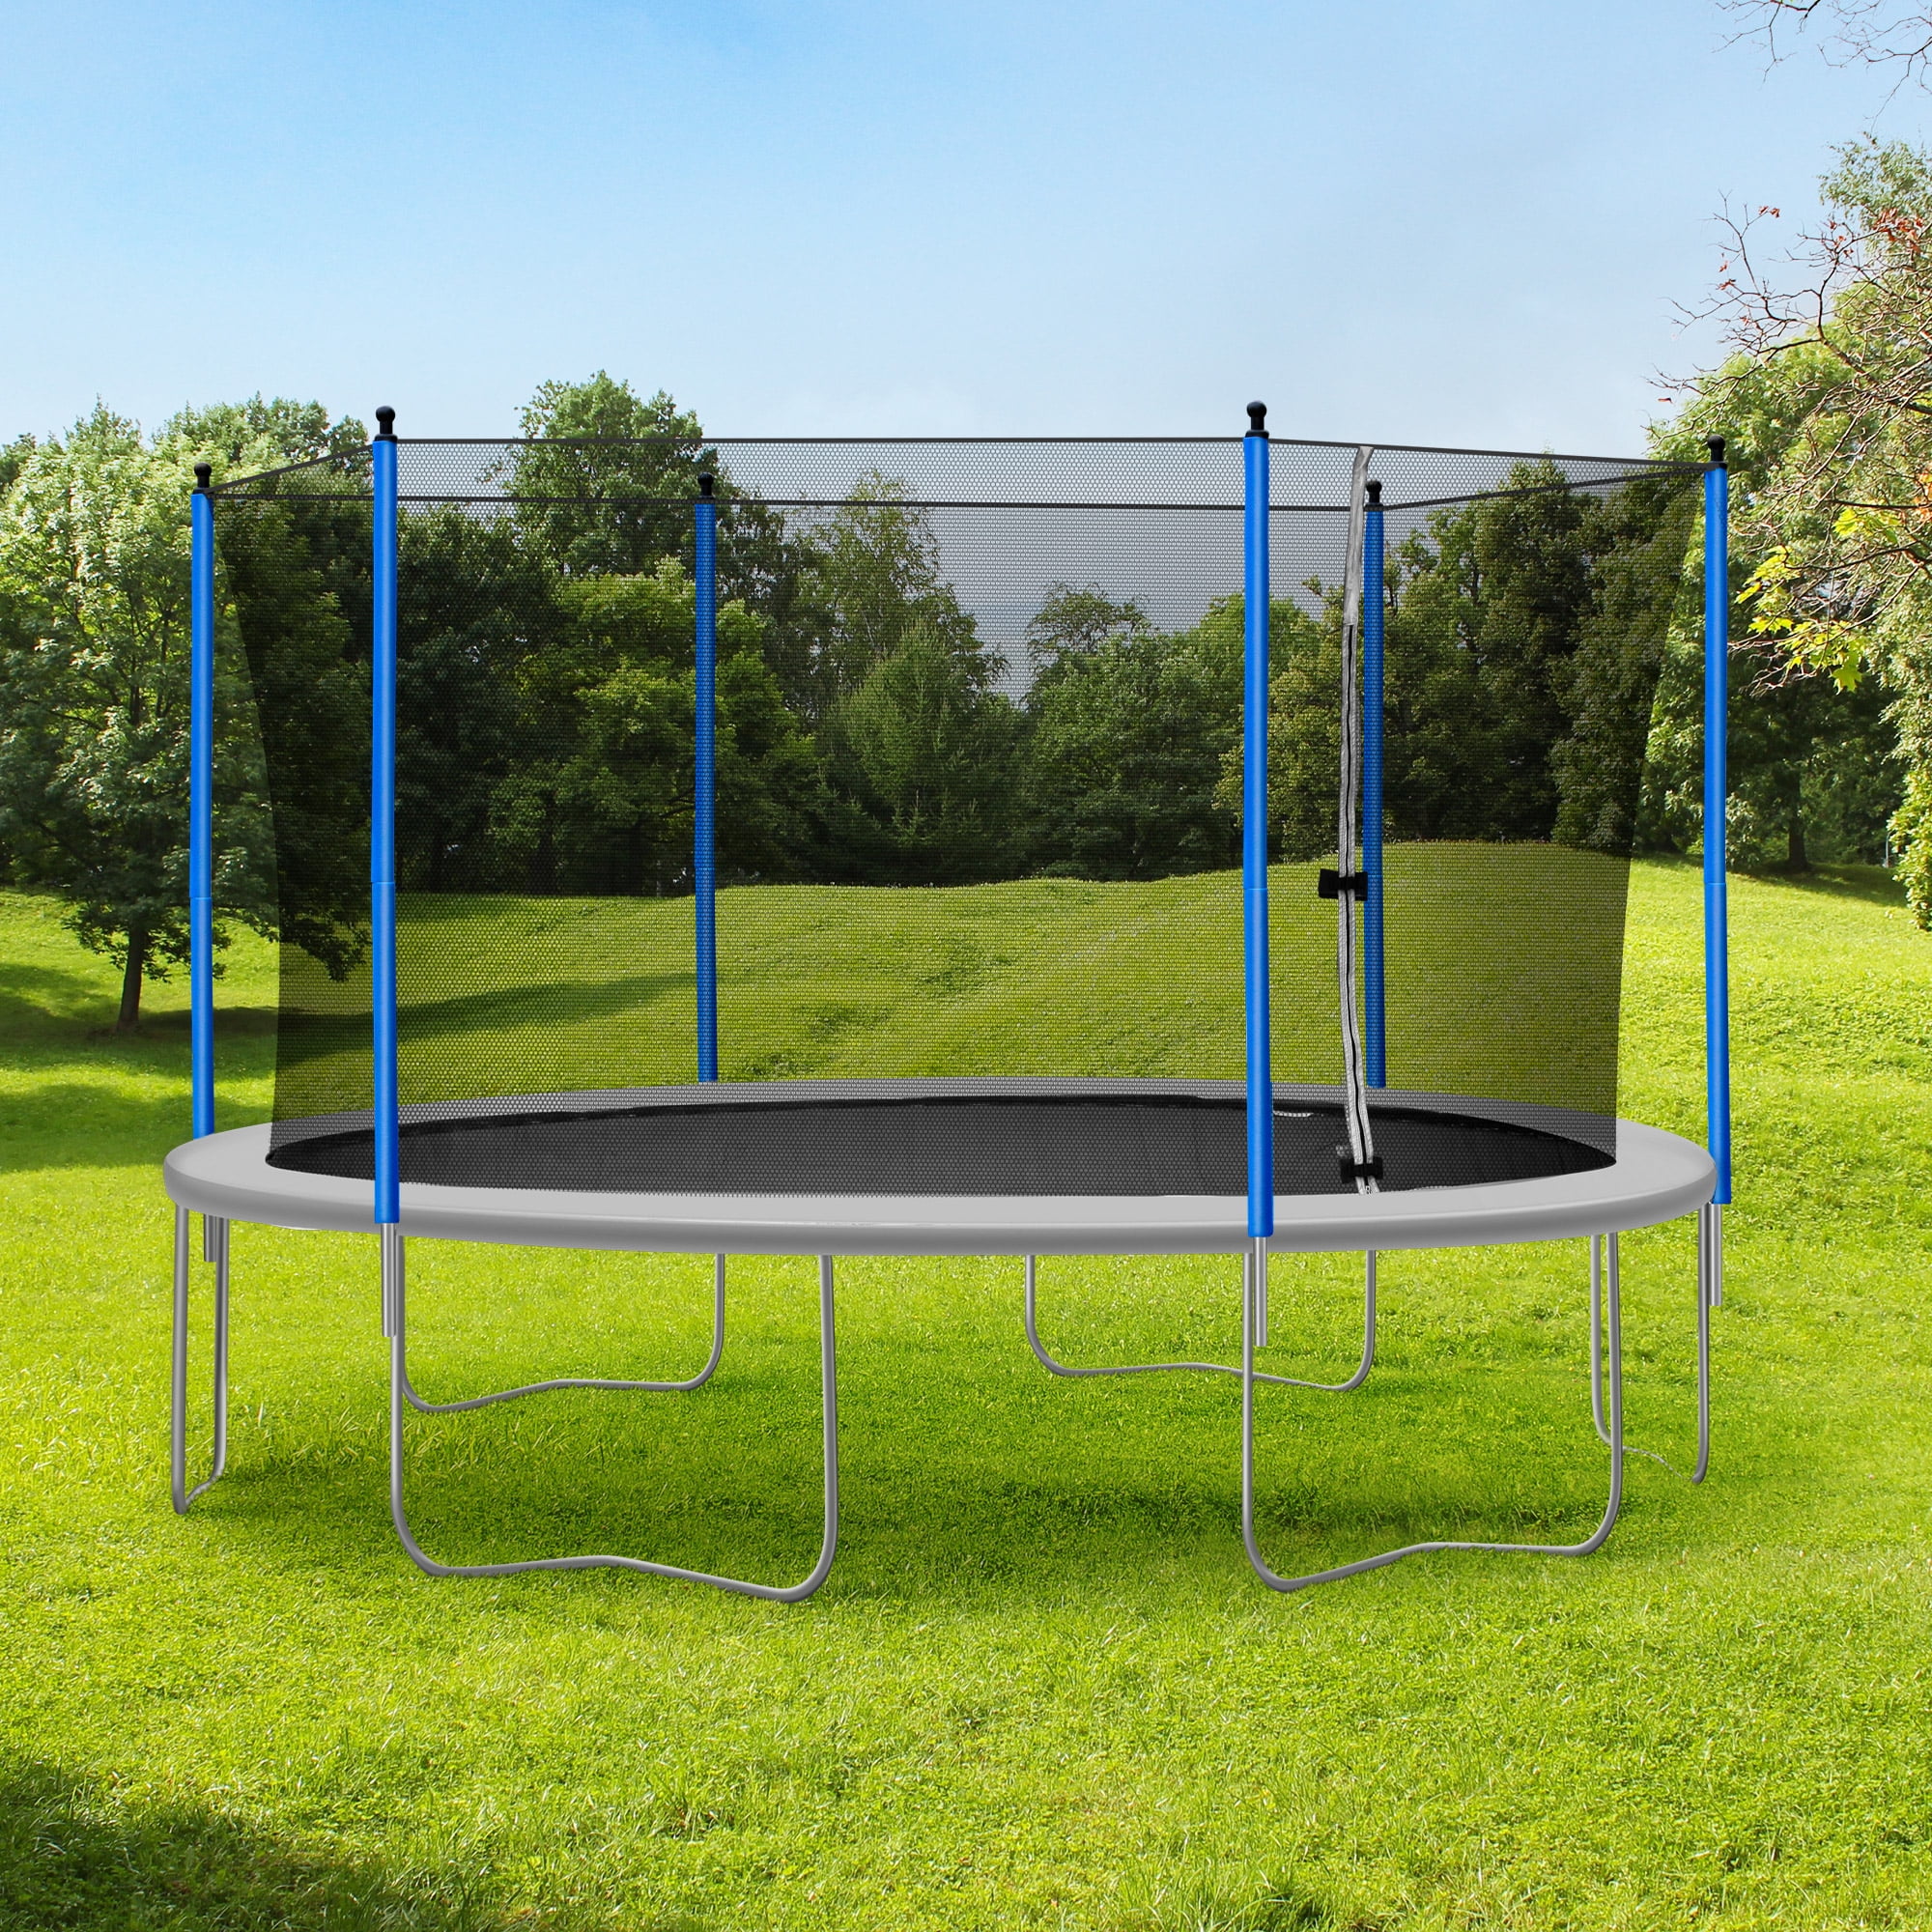 12 FT Kids Trampoline With Enclosure Net Jumping Mat And Spring Cover Padding FT 